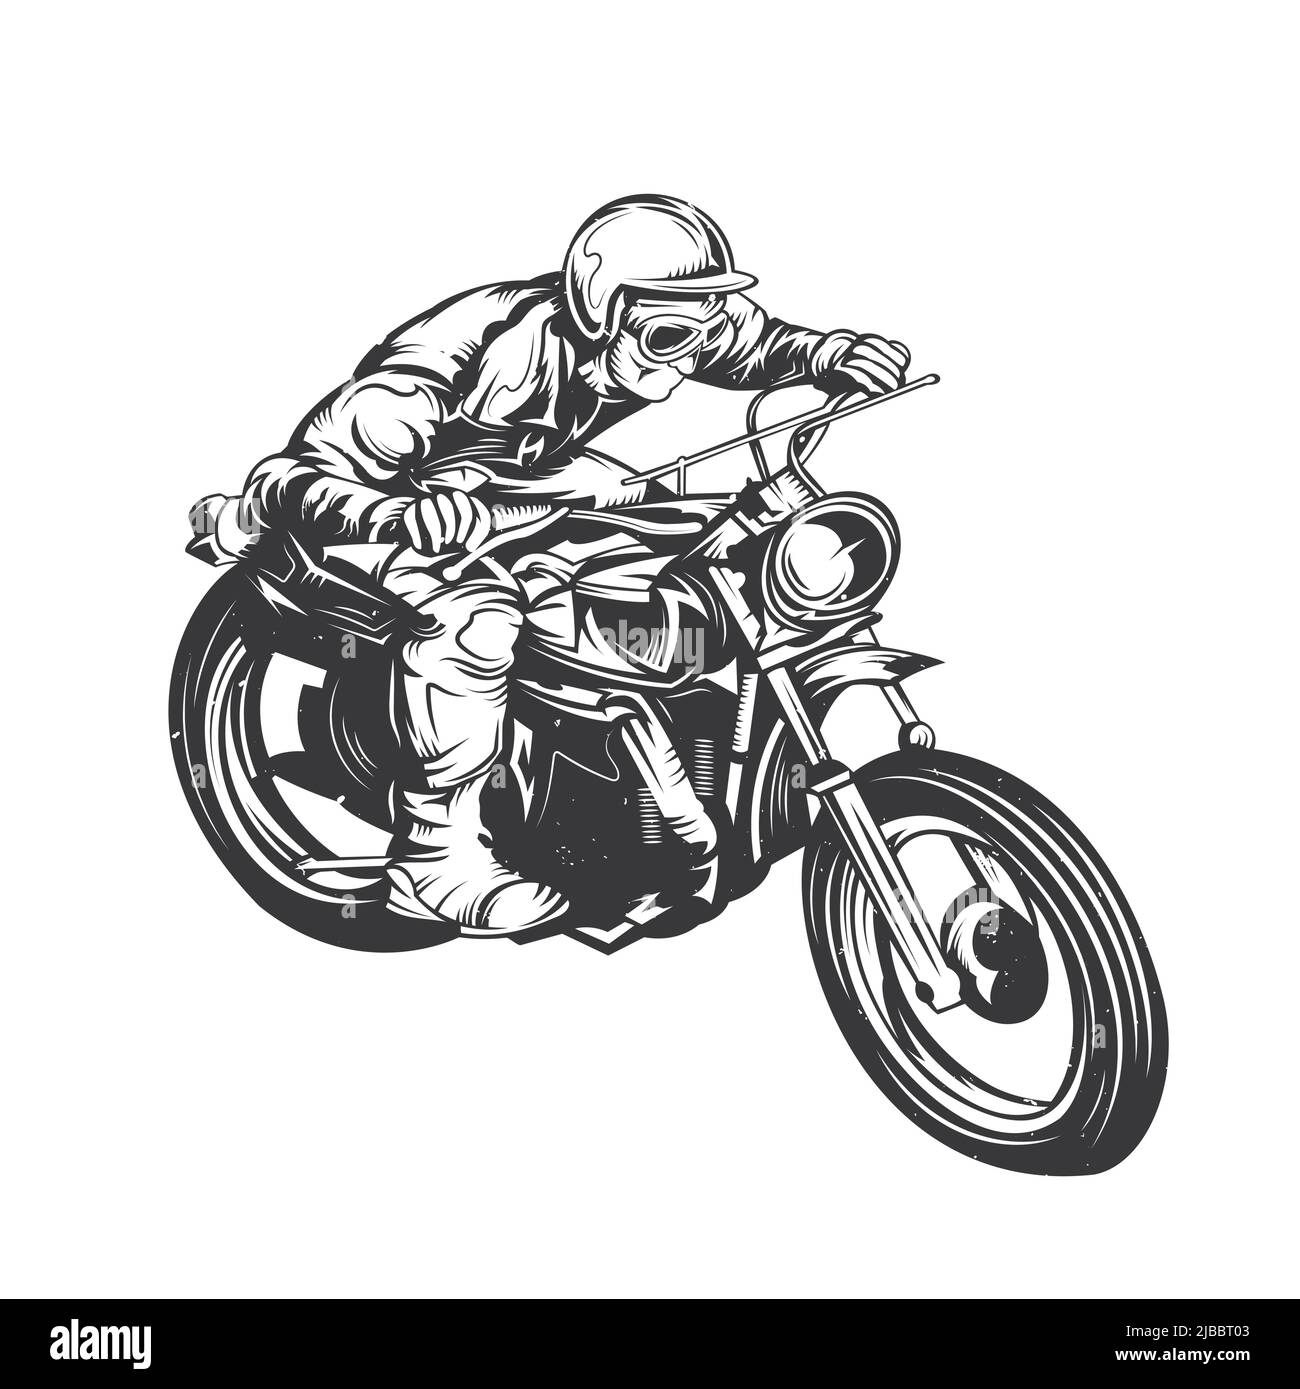 Illustration of classic man on motorcycle Stock Vector